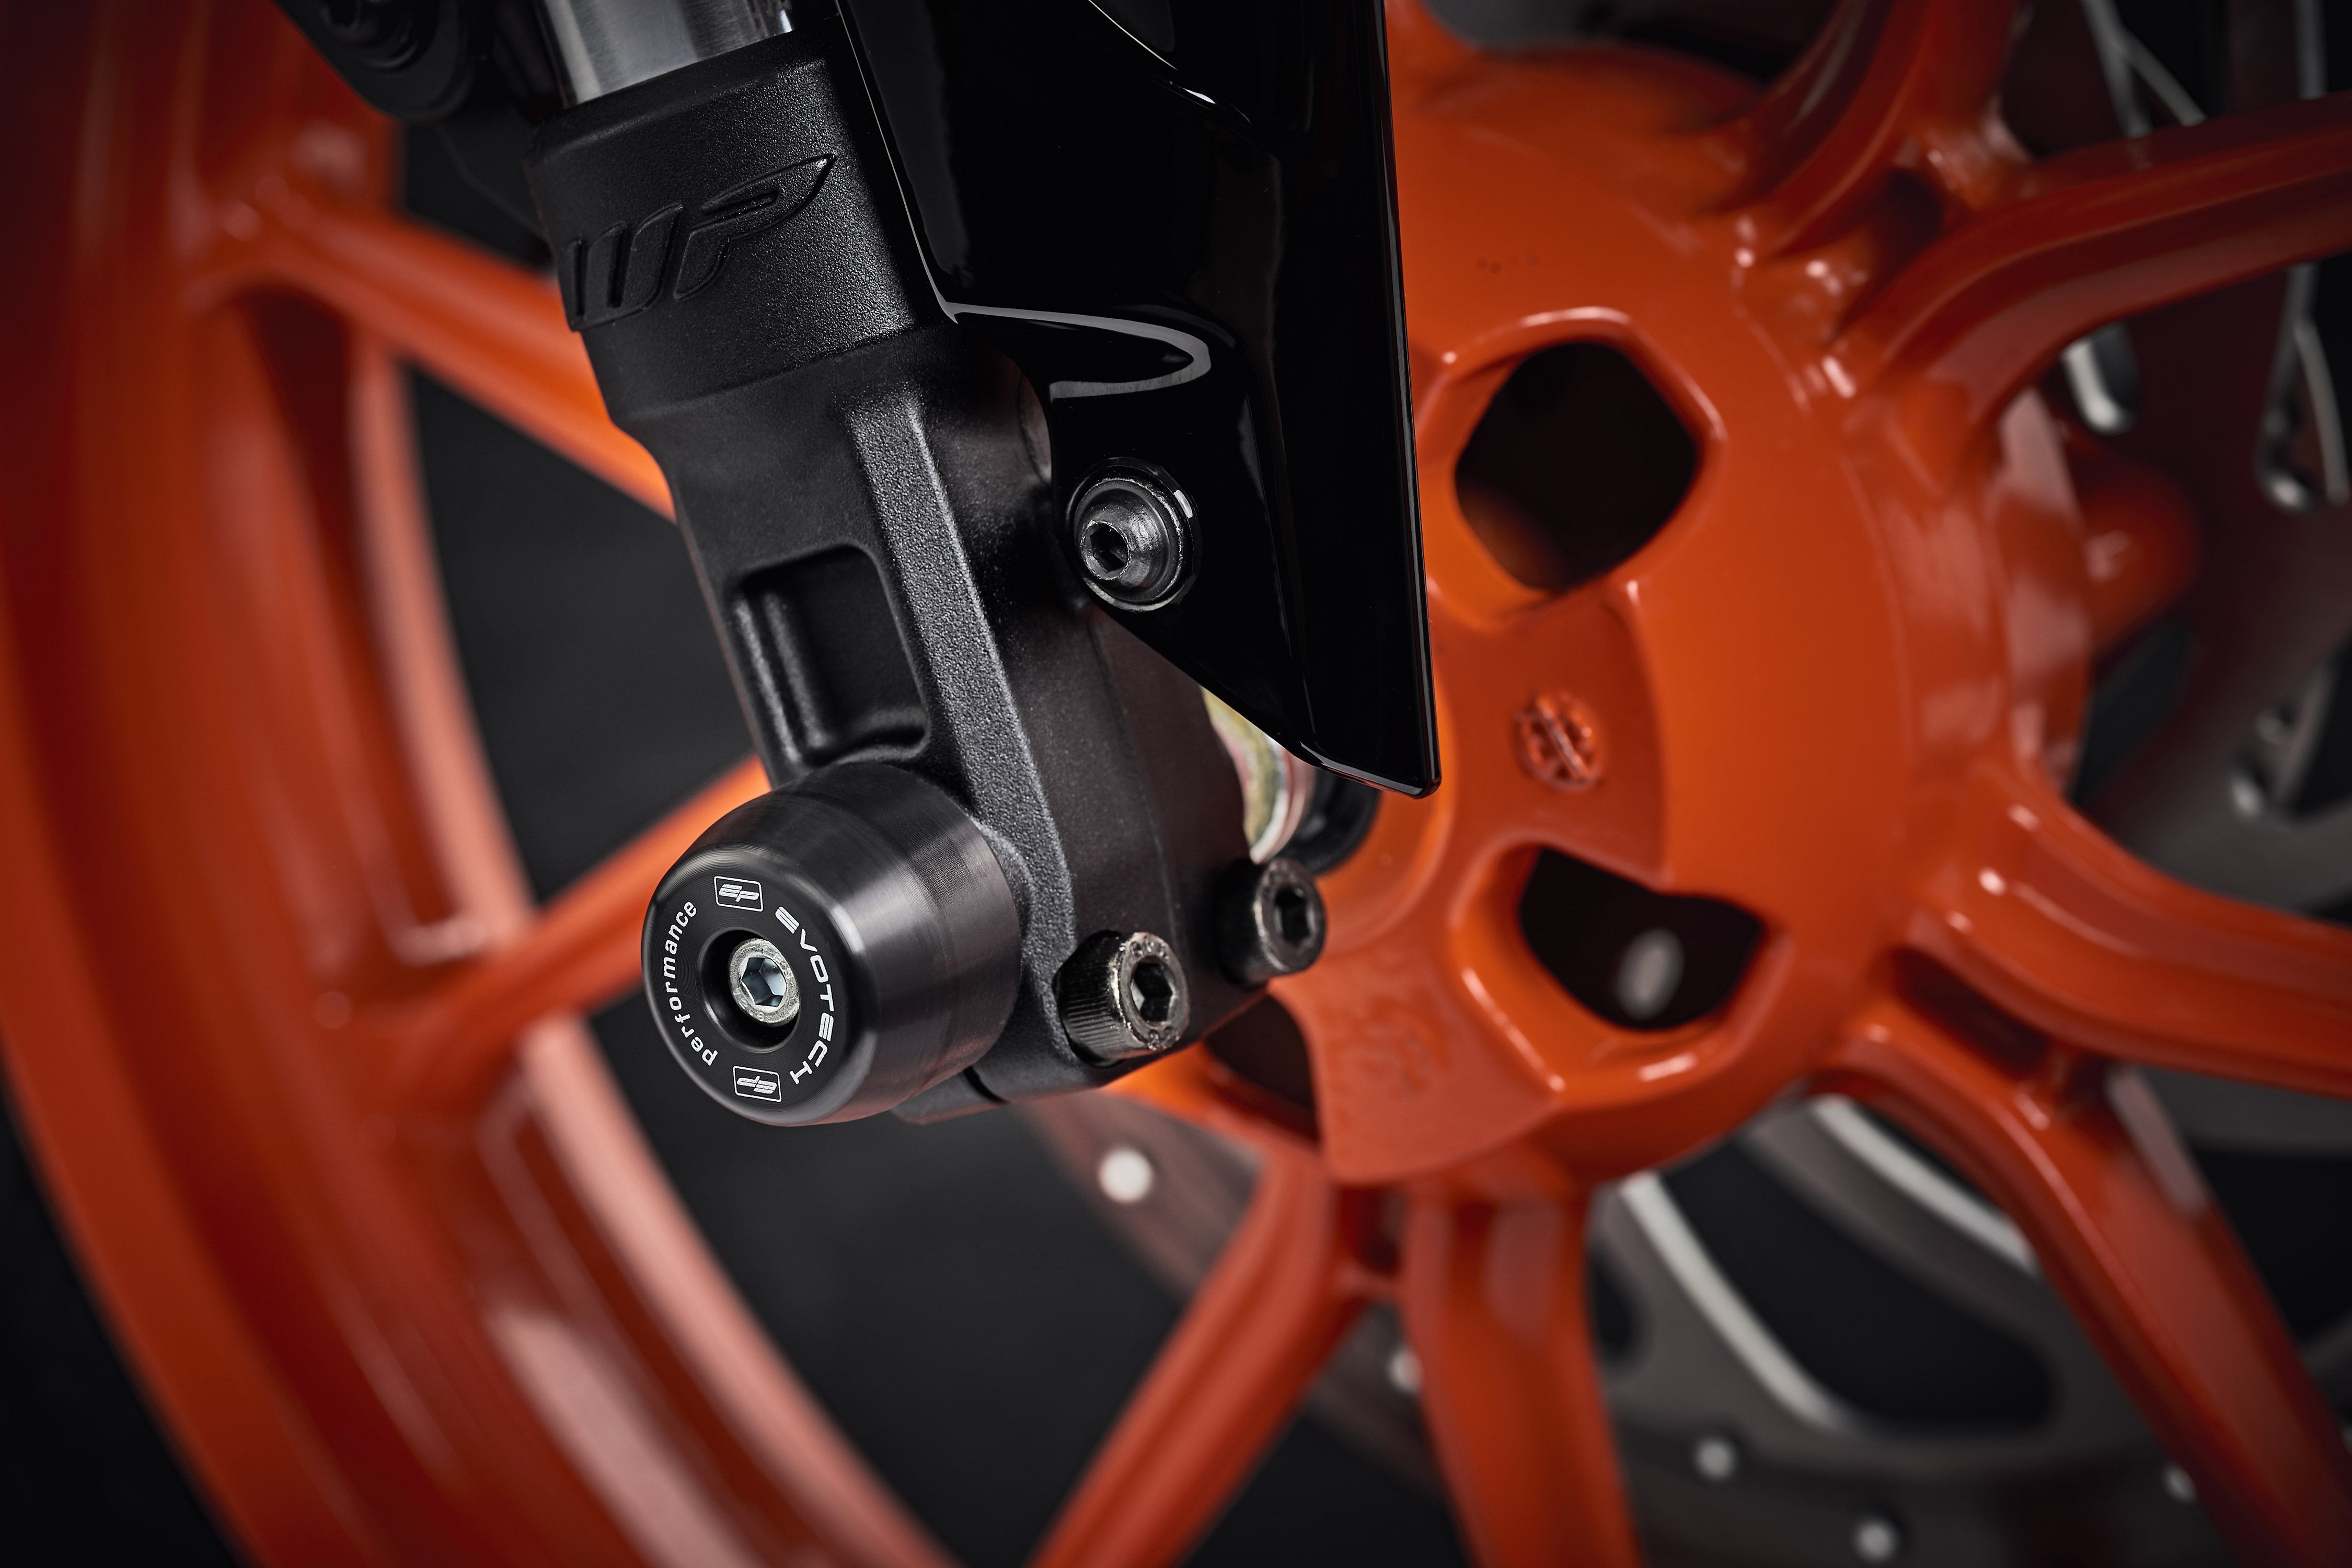 The lower front fork of the KTM RC 200 with EP Front Spindle Bobbins securely attached, offering crash protection to the motorcycleâs front wheel.